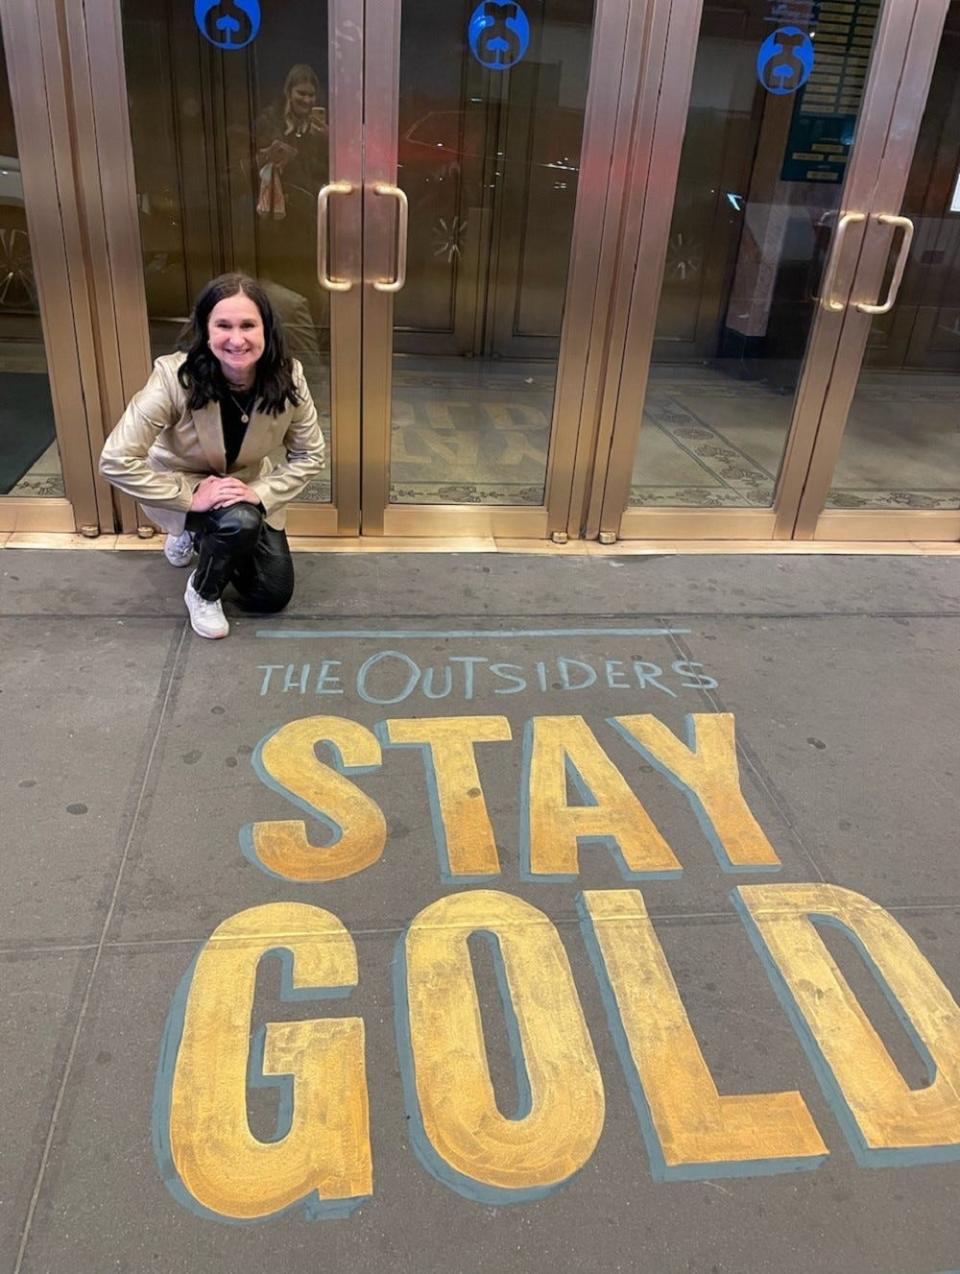 Oklahoma City native and co-producer Laura Galt poses outside the Bernard B. Jacobs Theatre on Broadway, where "The Outsiders" musical is playing. The stage adaptation of Tulsa writer S.E. Hinton's classic novel began its Broadway run with previews starting on March 16 ahead of the official opening night on April 11.